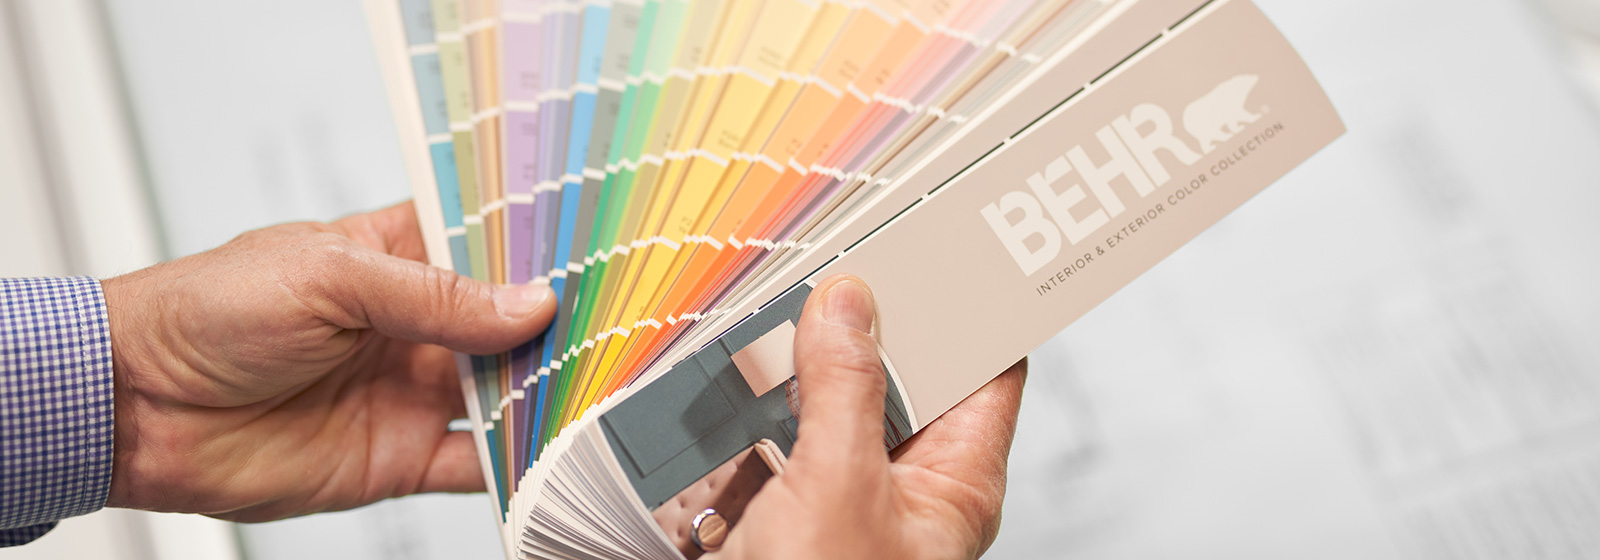 A large image of a BEHR Color Fan Deck held by a hand.